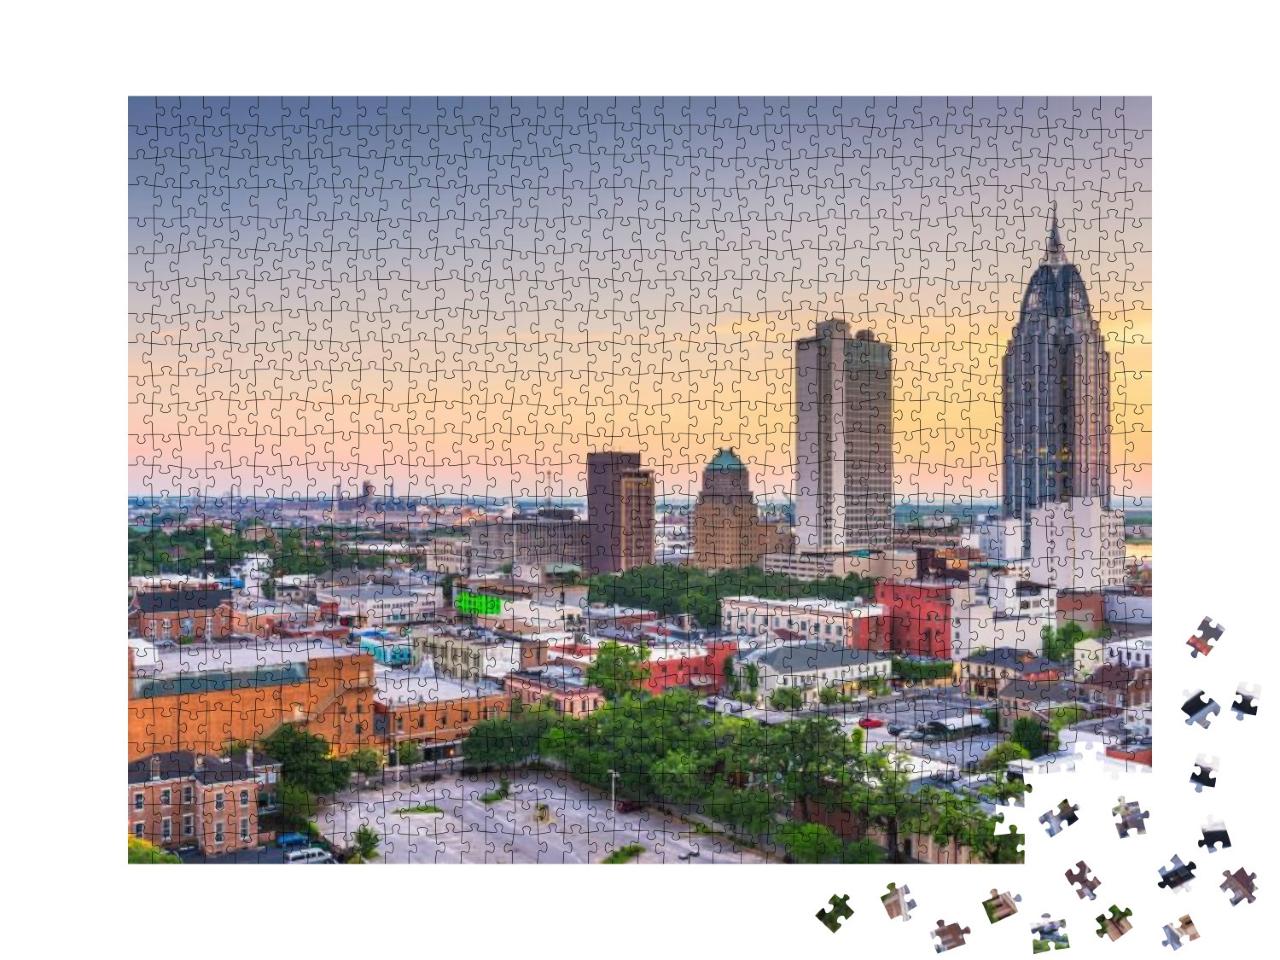 Mobile, Alabama, USA Downtown Skyline At Dusk... Jigsaw Puzzle with 1000 pieces